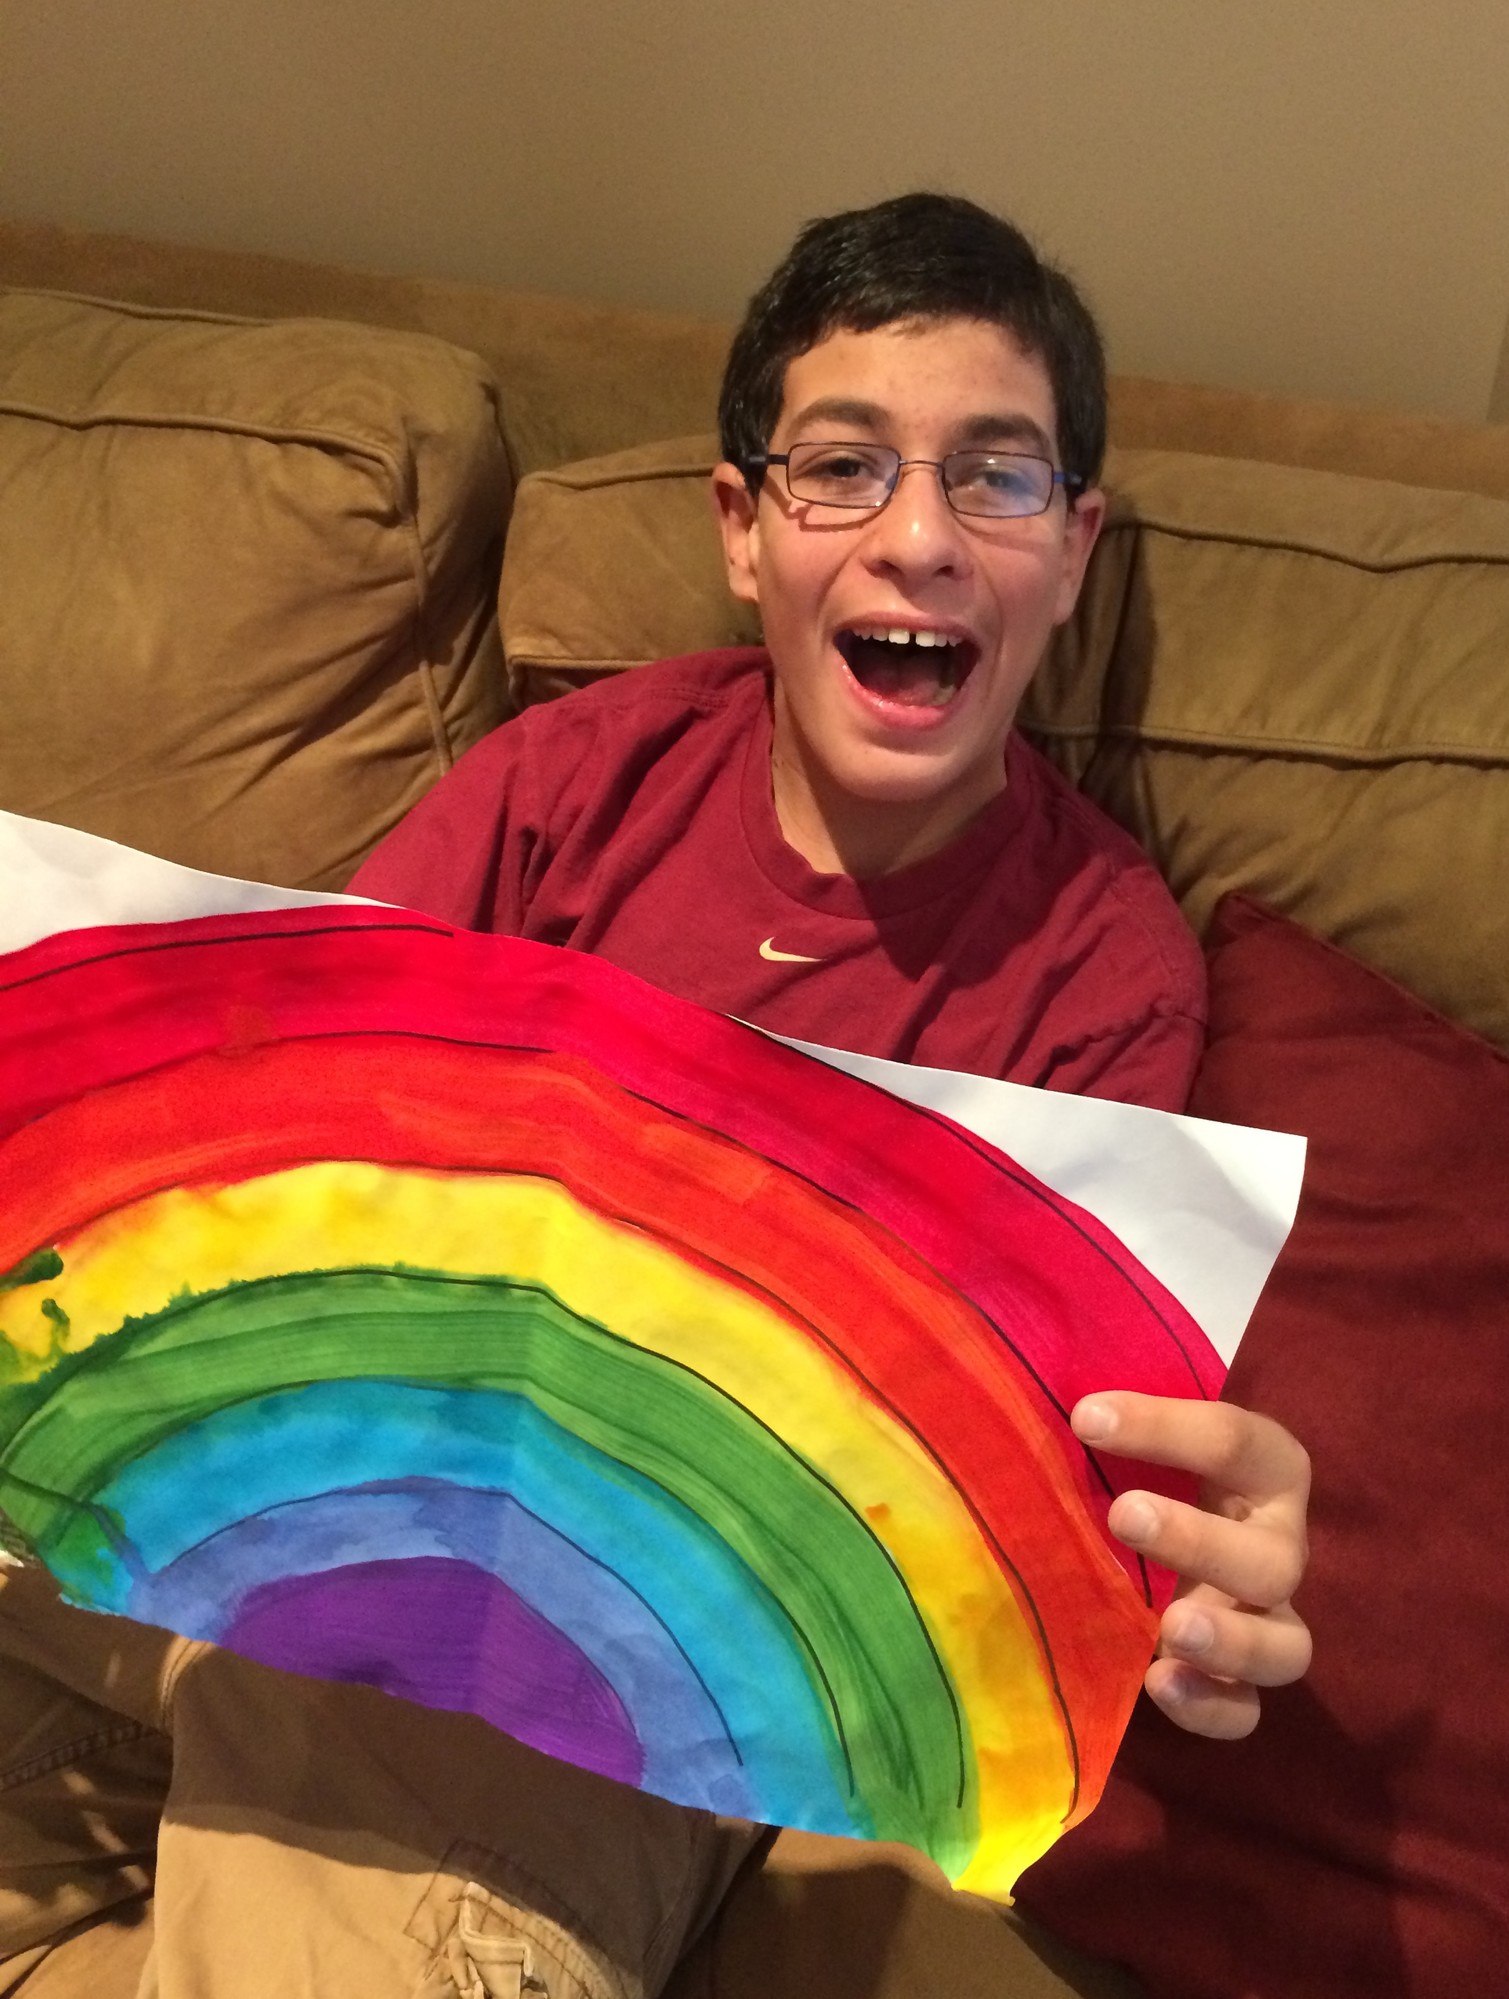 Justin Silver, 13, of Lynbrook, was the inspiration for Ben Moelis’s Magic Arrows toy.